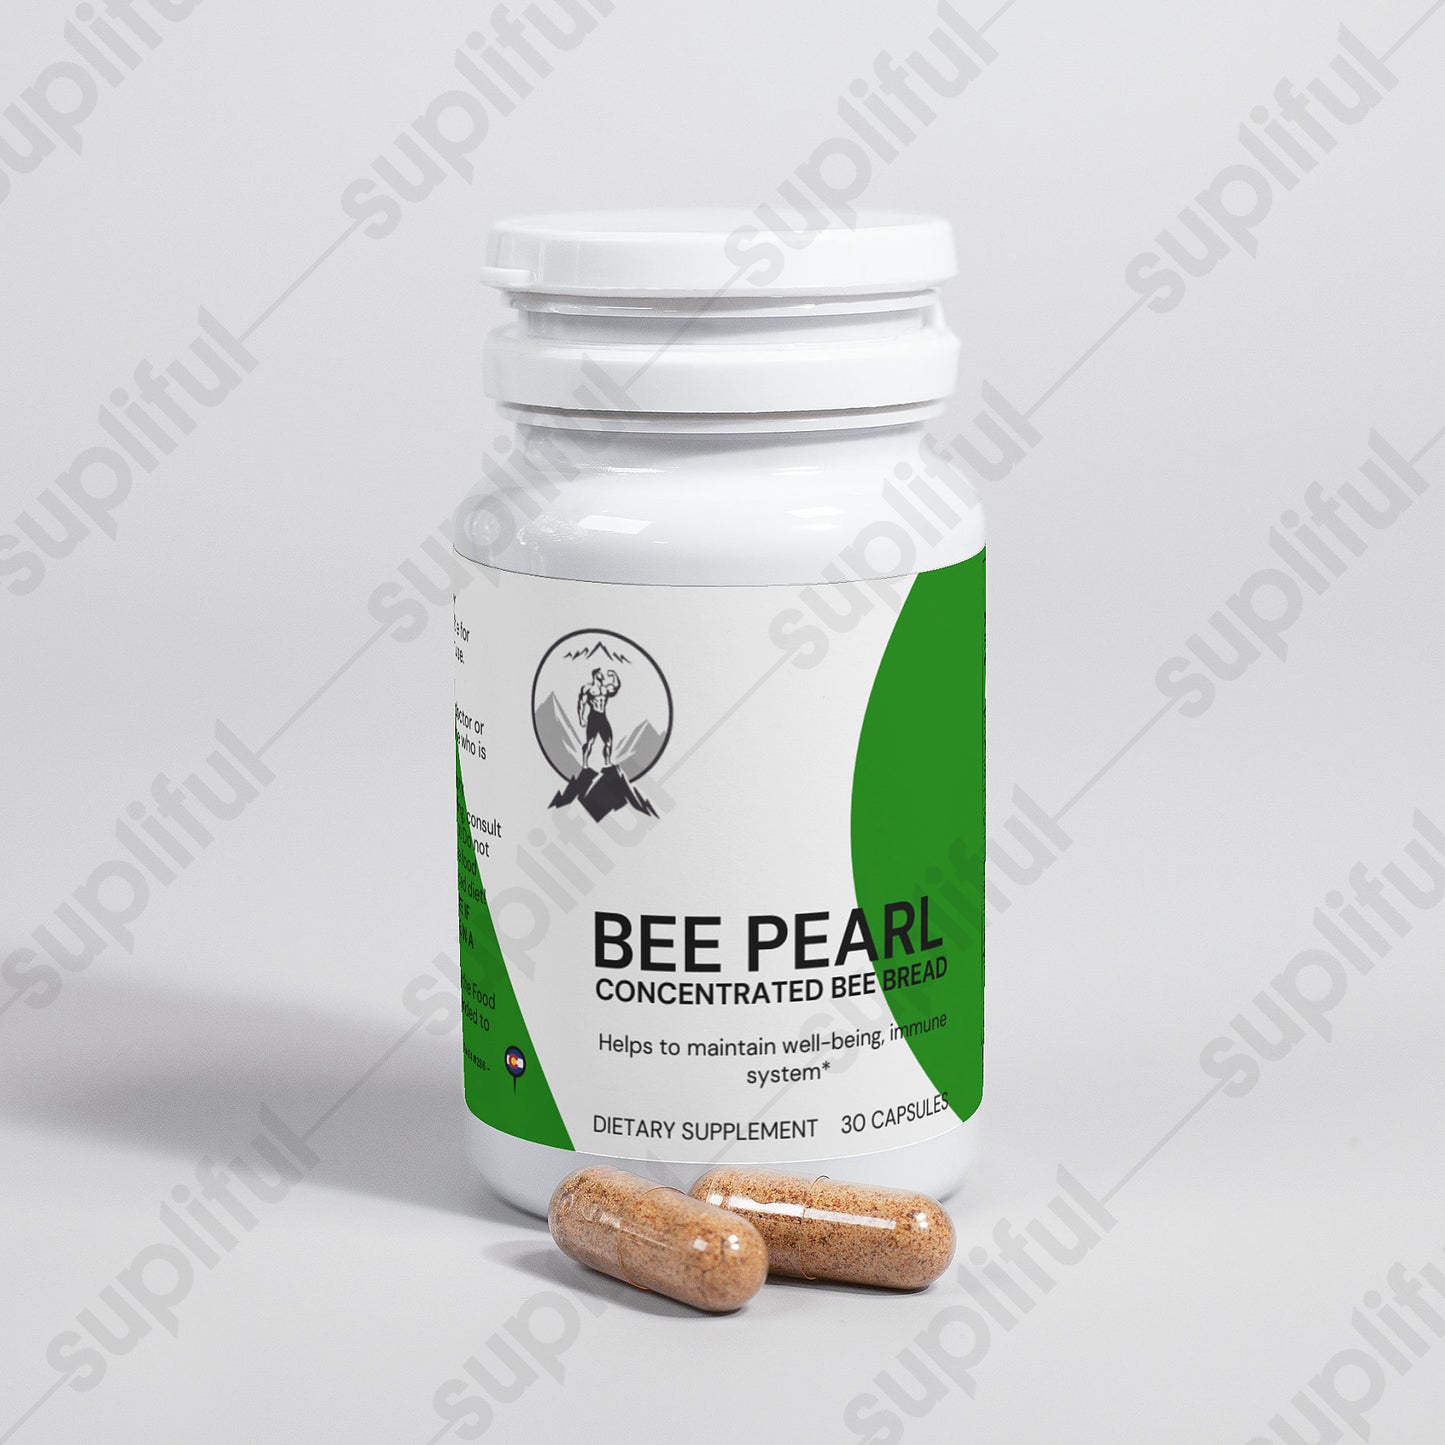 Bee PearlNatural ExtractsBee Pearl is a pollen, nectar, and enzyme blend. Each capsule contains vitamins, microelements, polyphenols, unsaturated fatty acids, and antioxidants. This natural Bee PearlThe Rocky Ranger